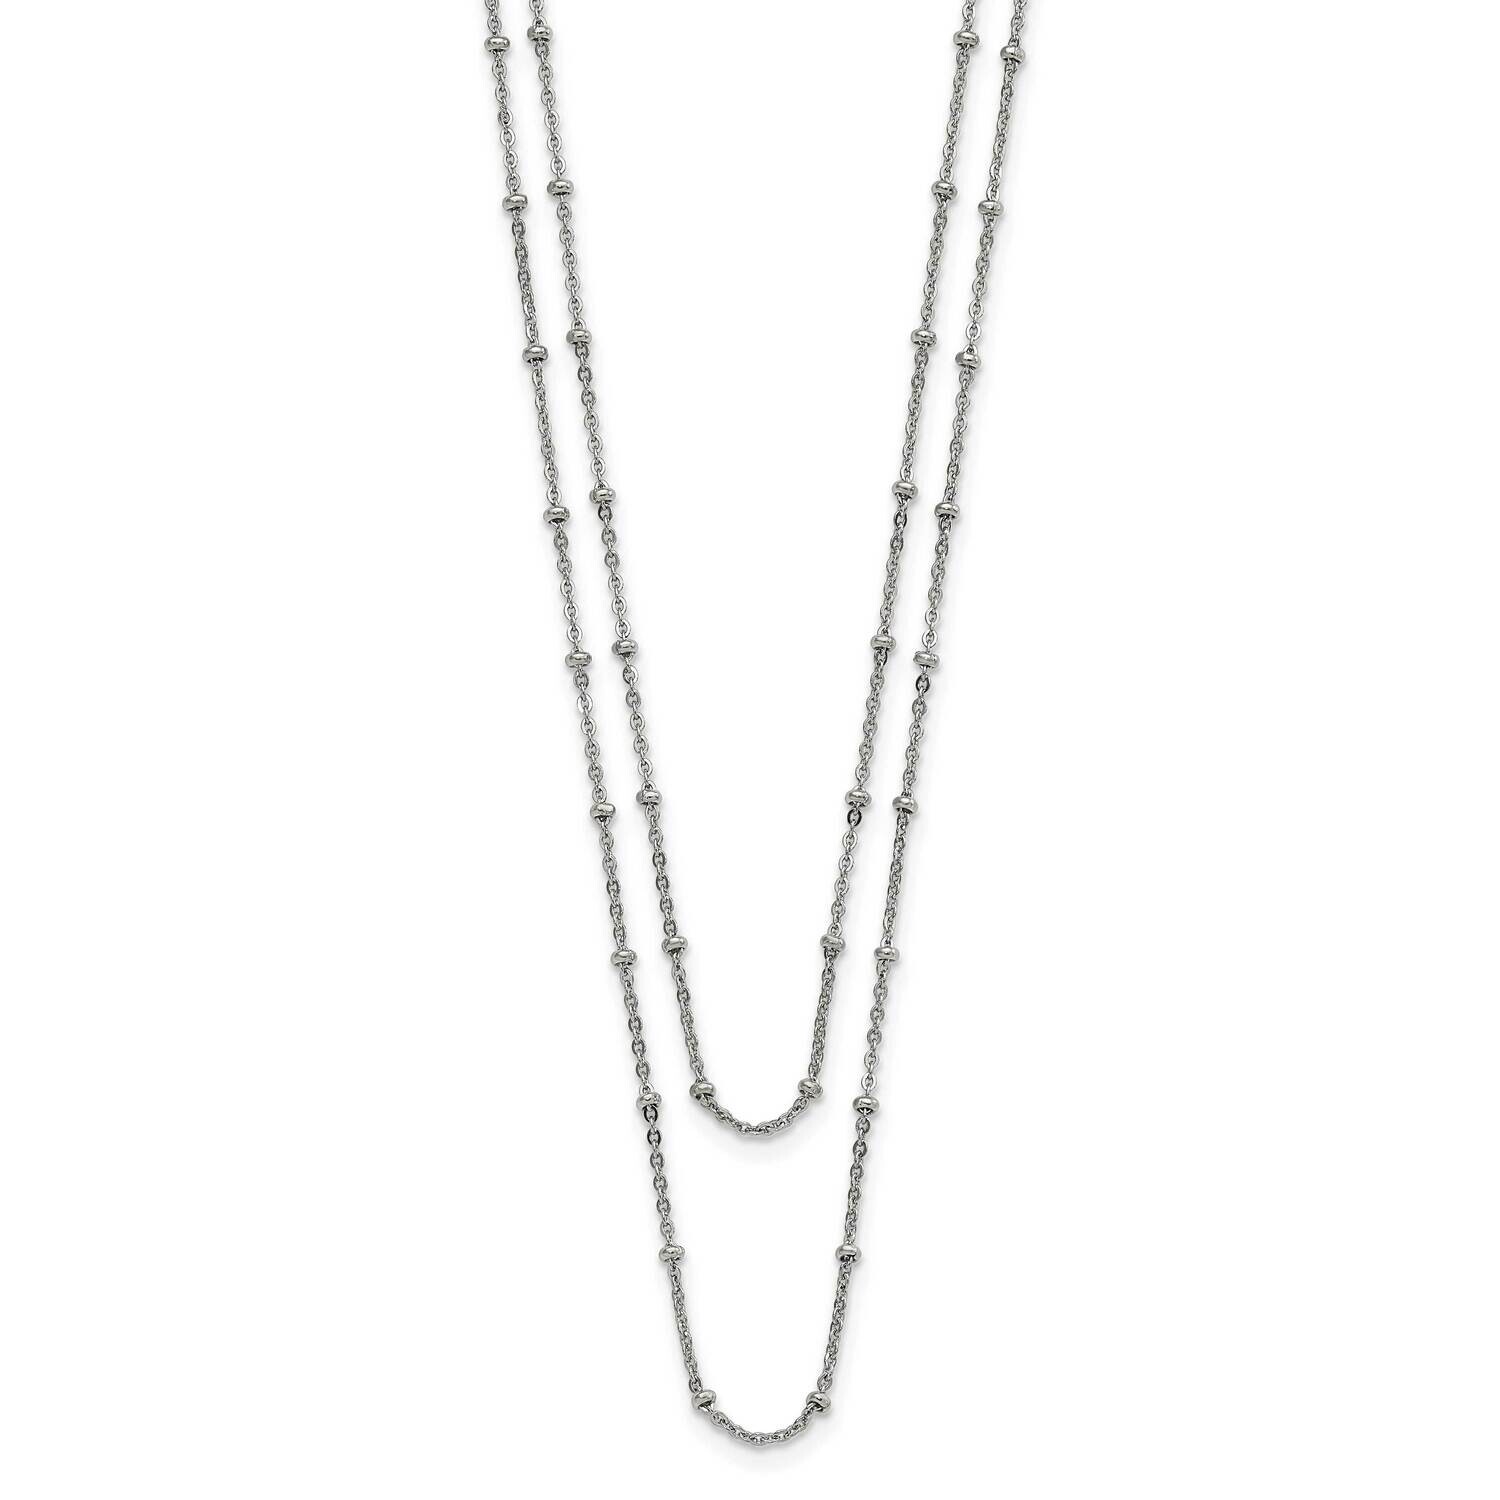 Chisel Polished 2-StrBeaded 16 Inch 1 Inch Extension Necklace Stainless Steel SRN3109-16